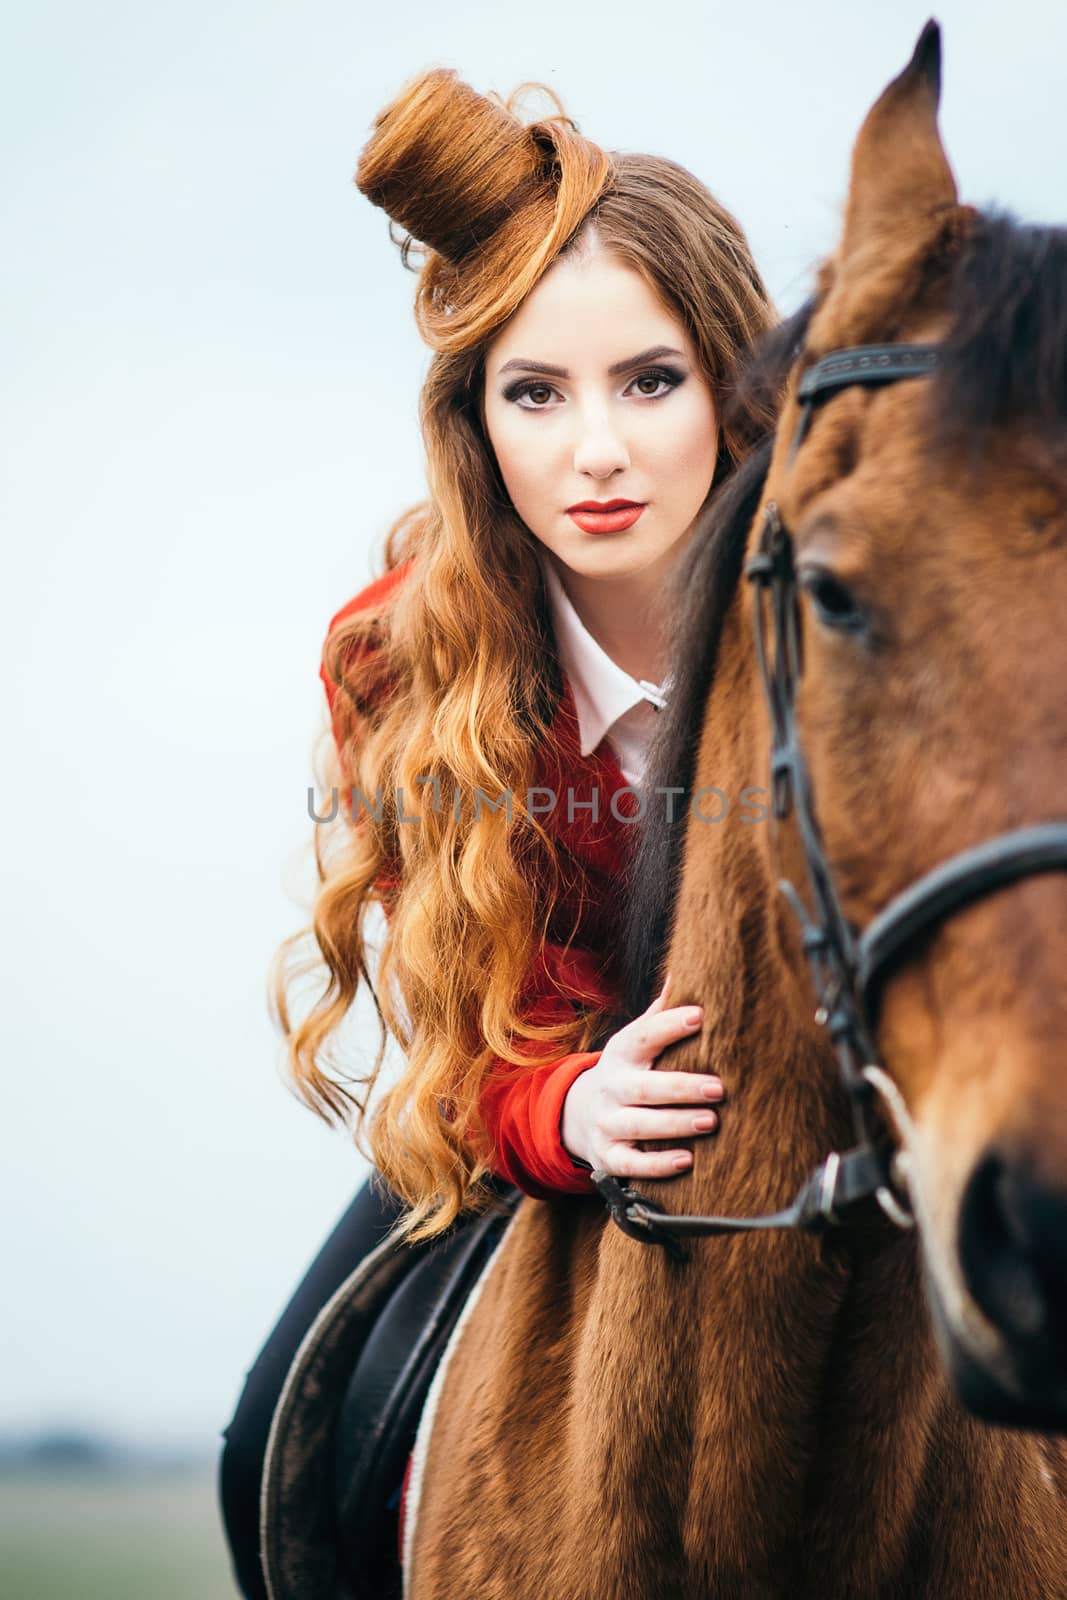 red-haired jockey girl in a red cardigan and black high boots wi by Andreua